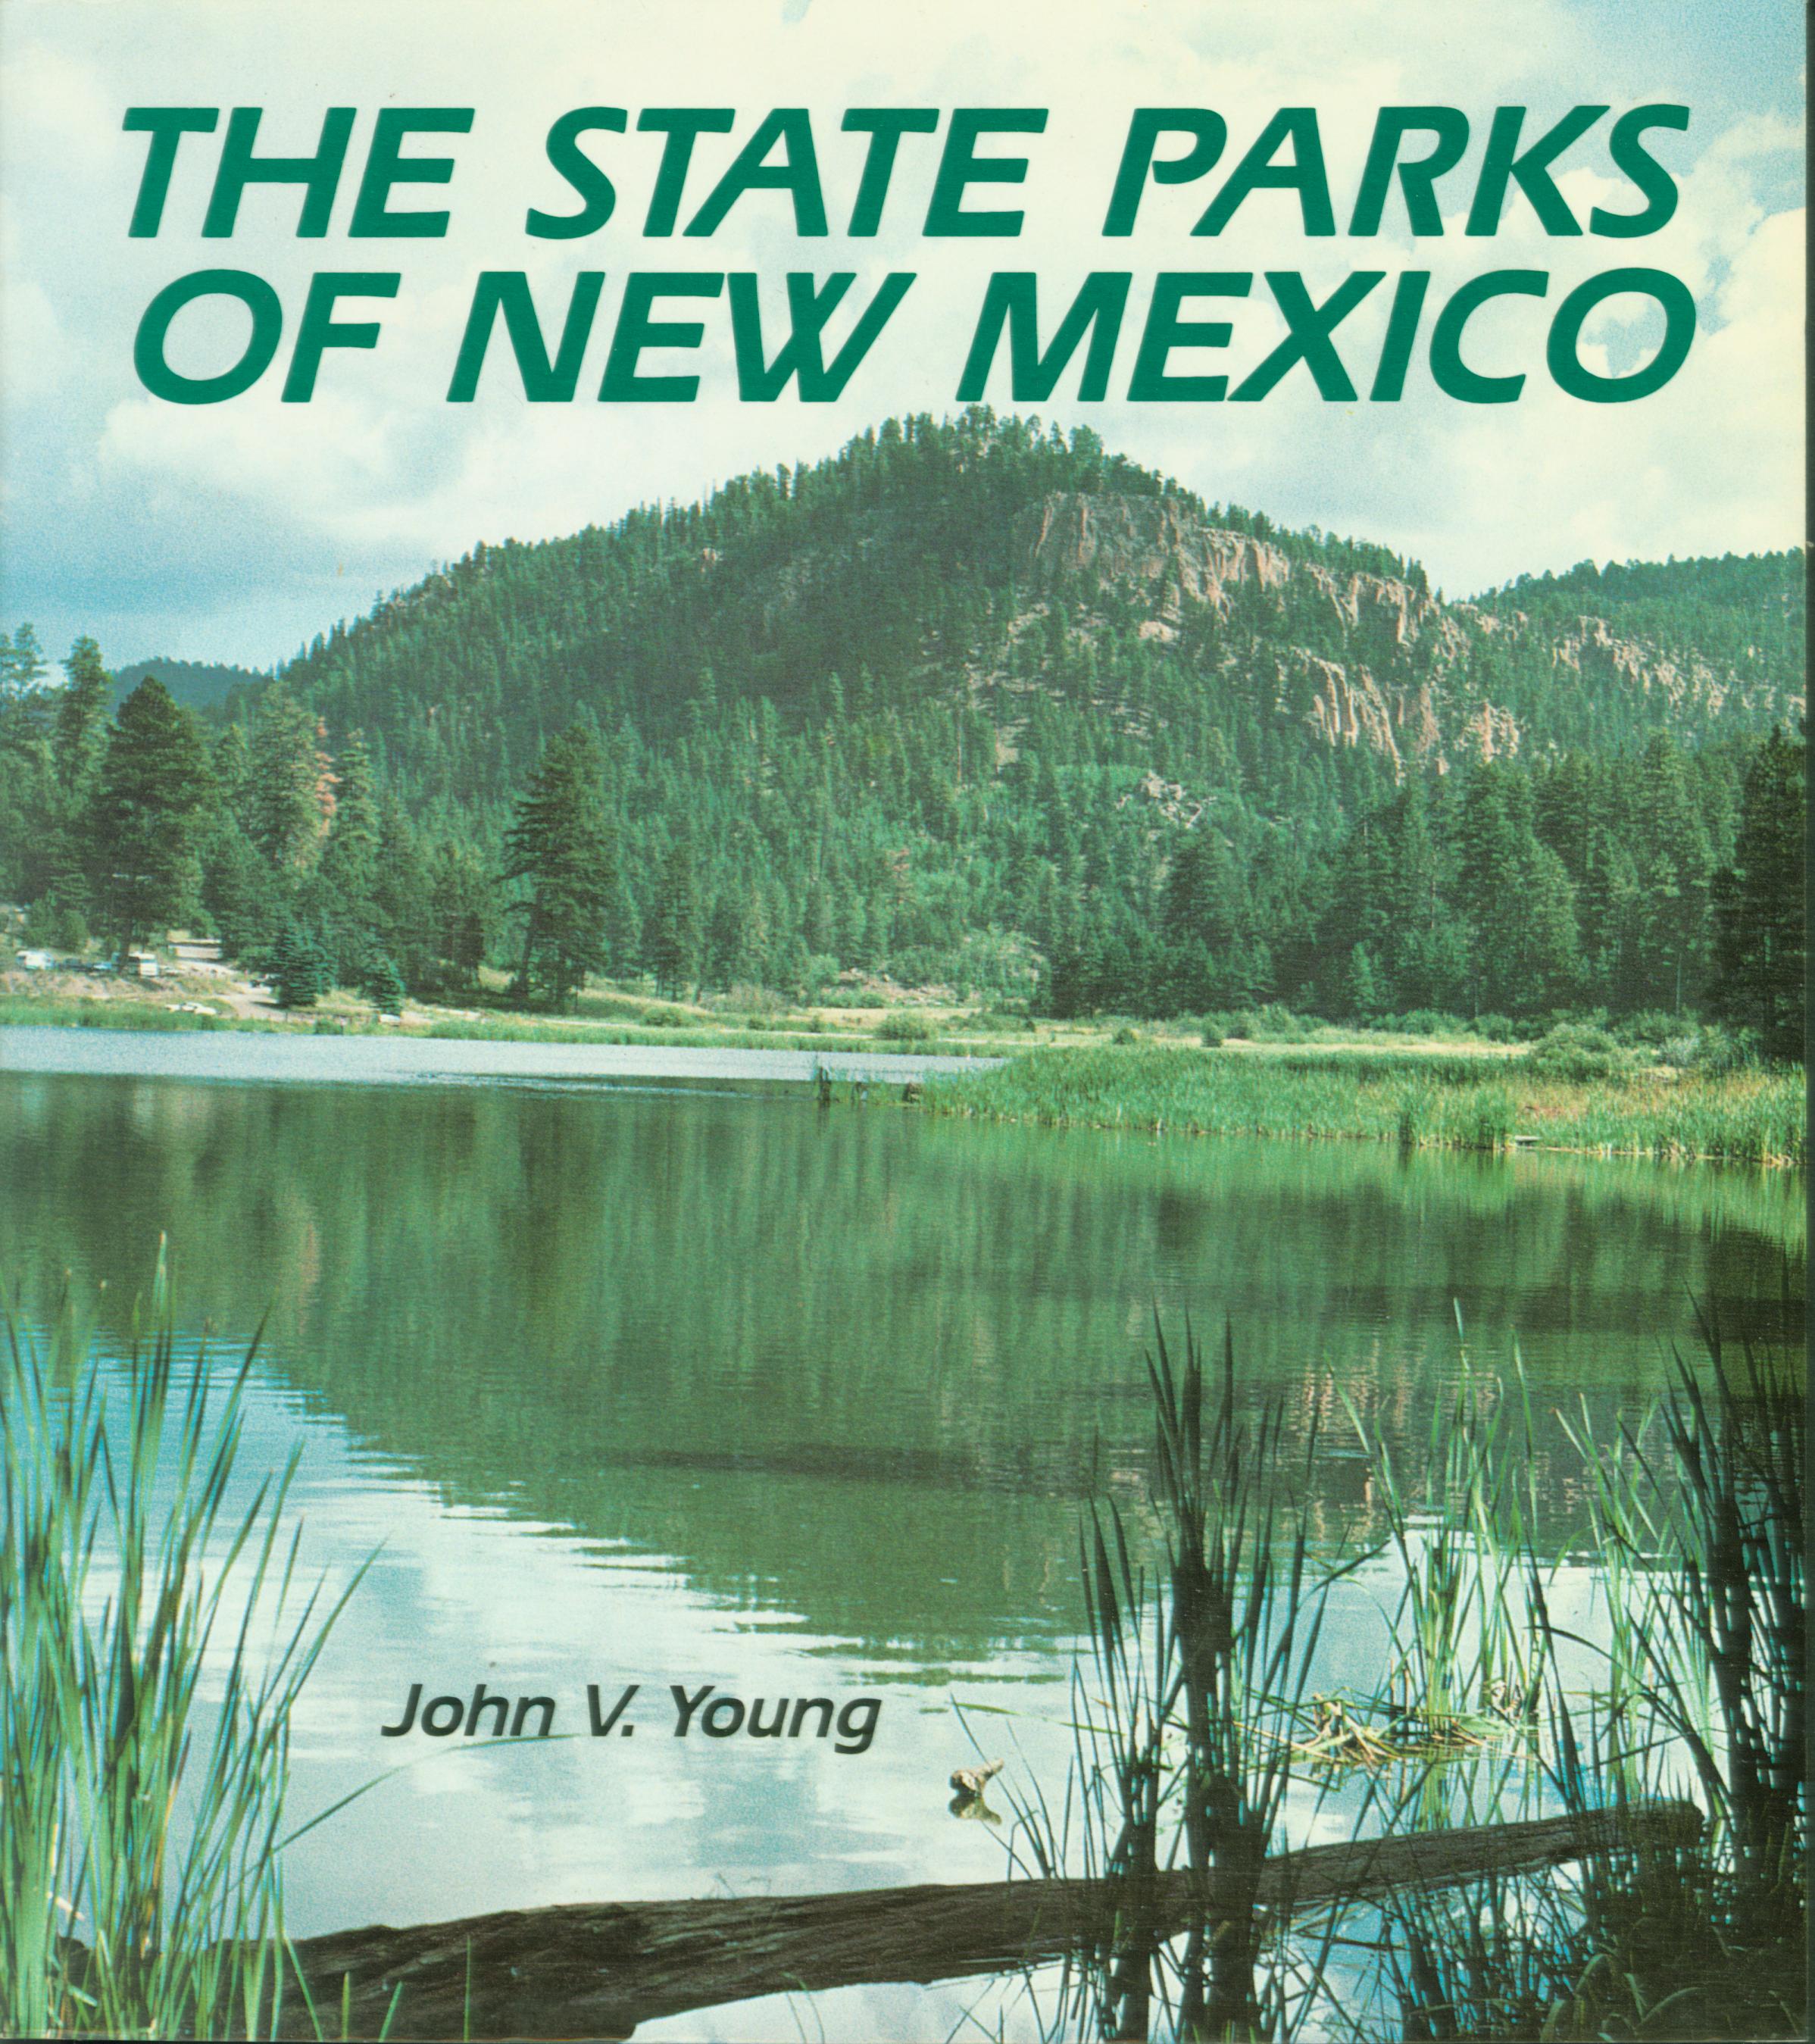 THE STATE PARKS OF NEW MEXICO.